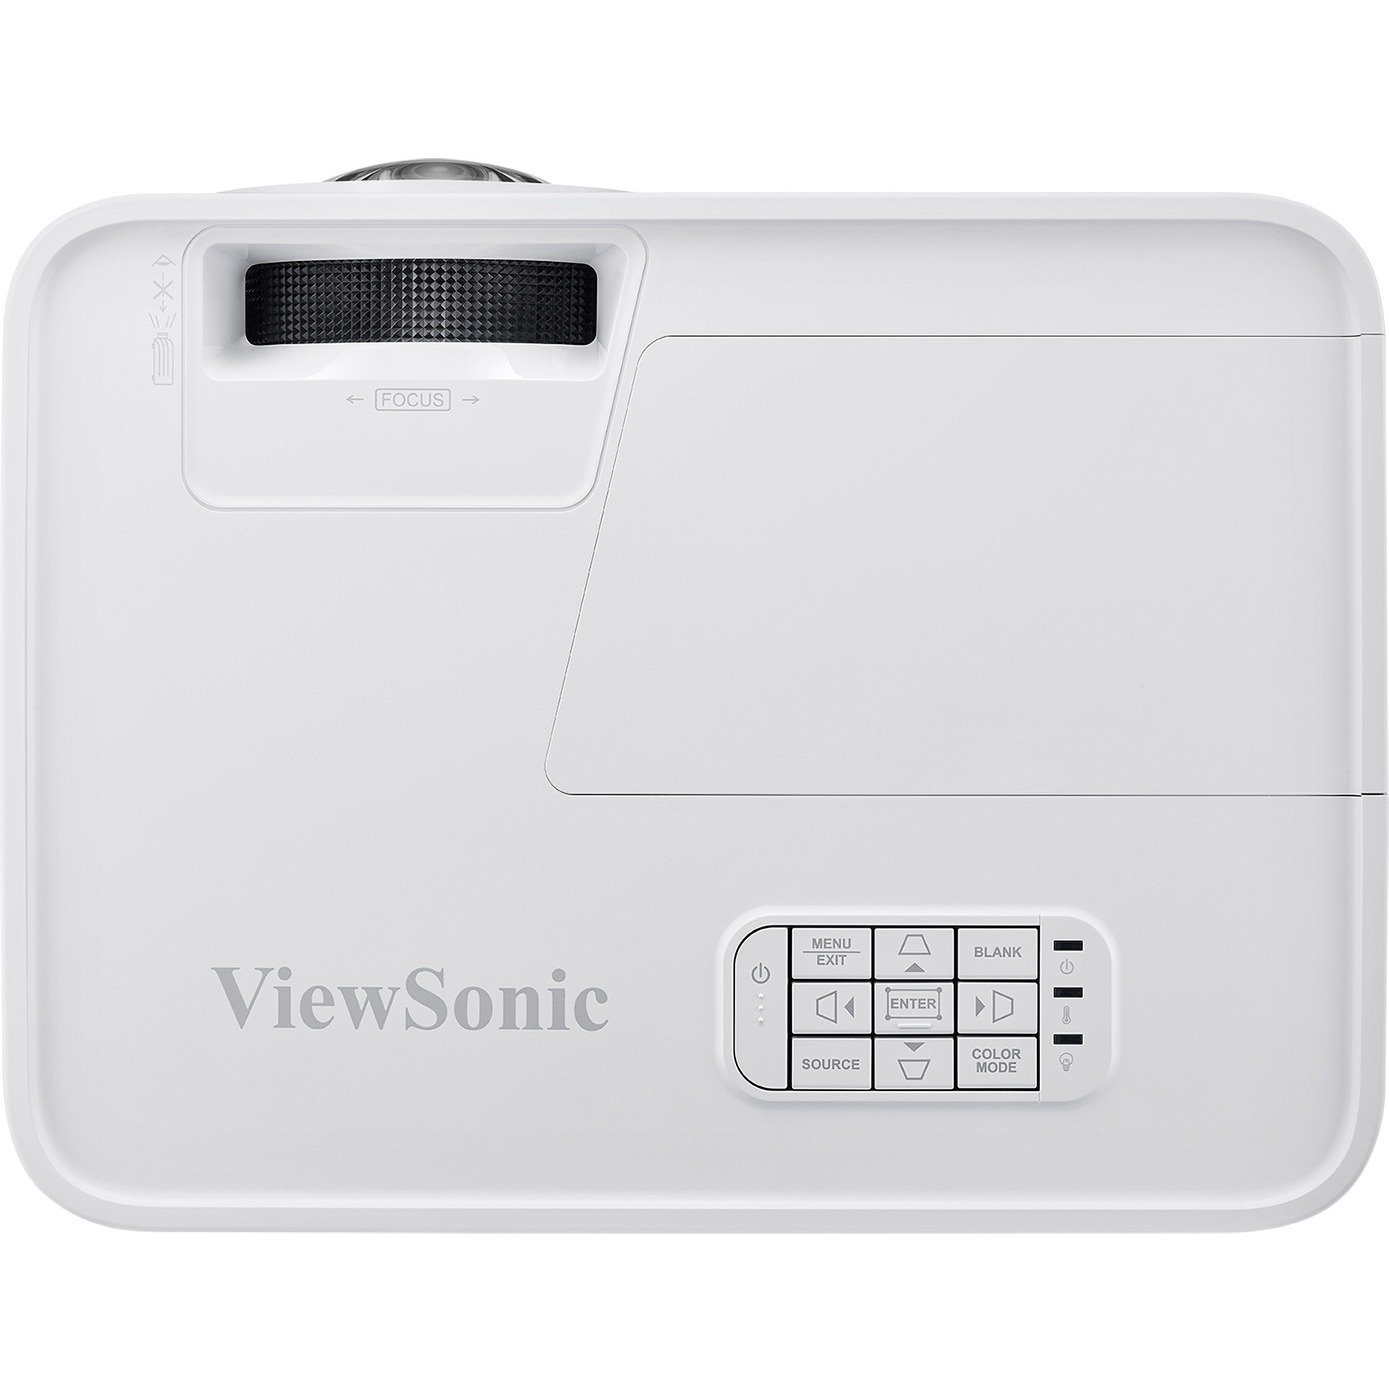 ViewSonic PS600W 3700 Lumens WXGA HDMI Networkable Short Throw Projector for Home and Office